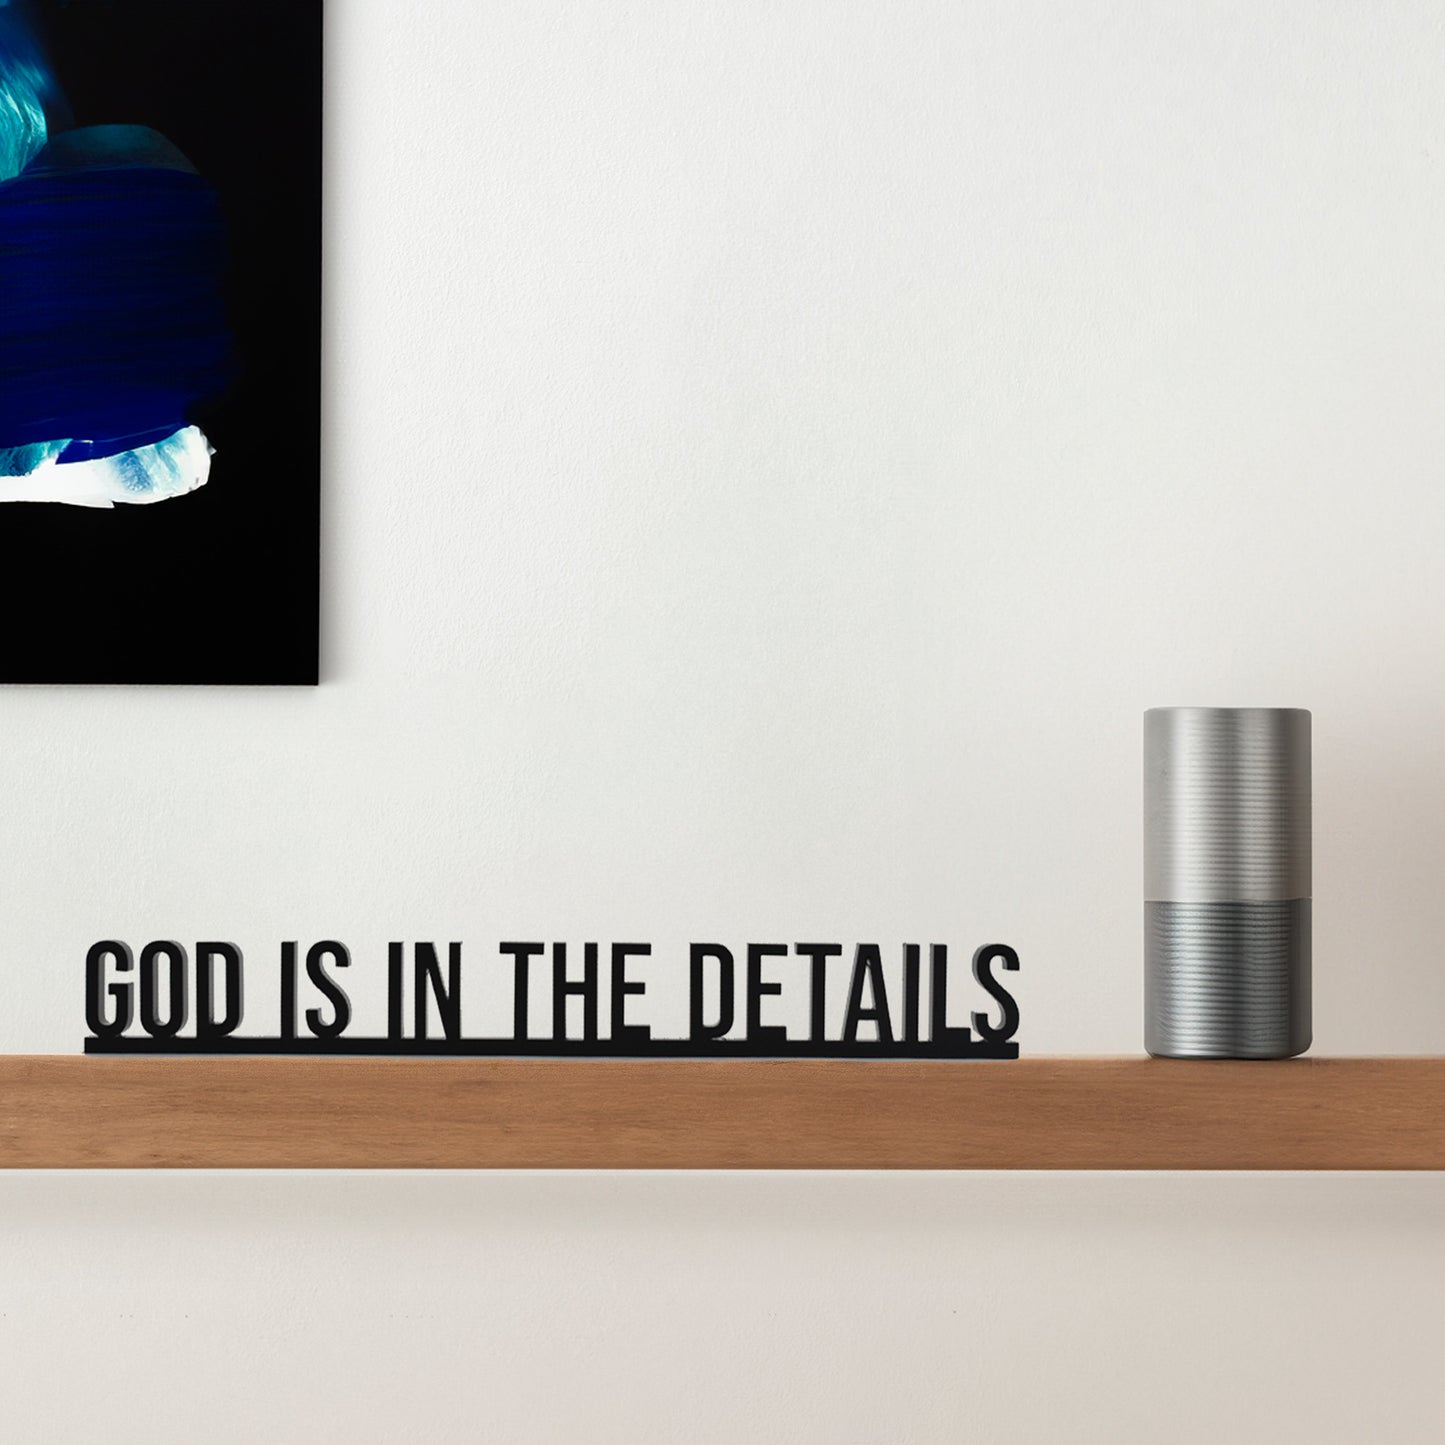 Architecture Quotes - God is in the Details  beamalevich architecture gift design gift art gift